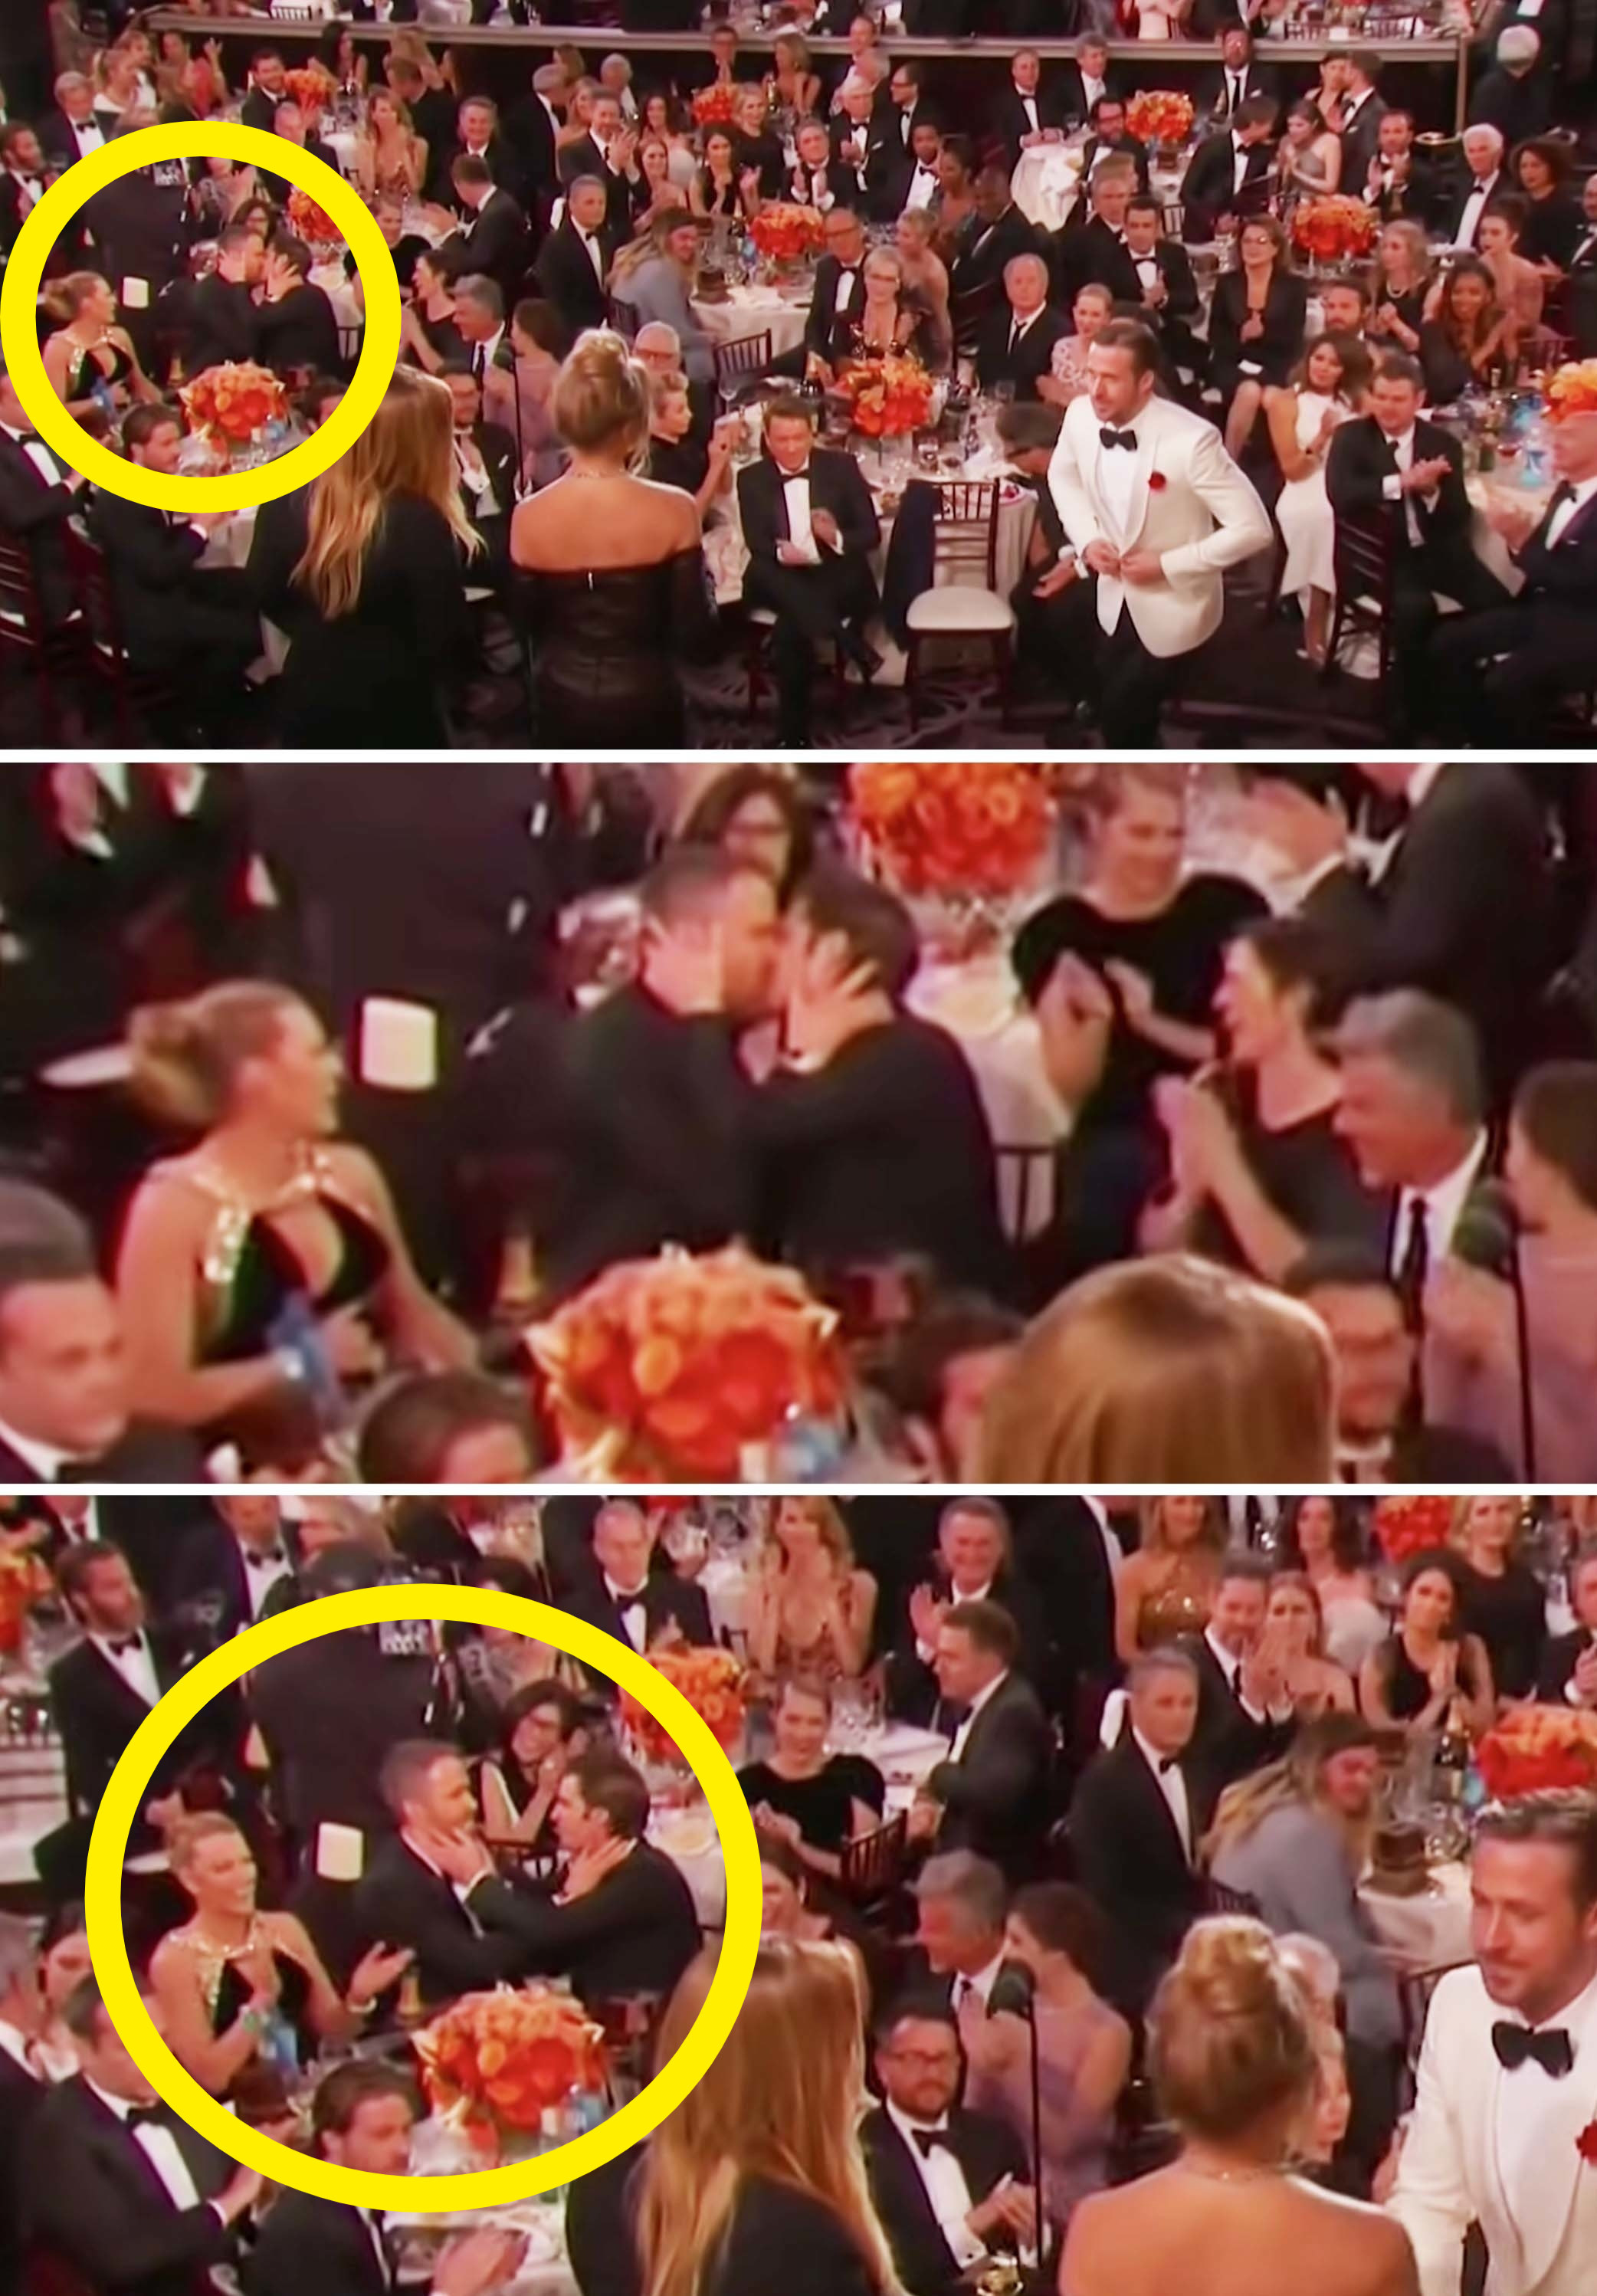 Andrew and Ryan kissing at a table at the Golden Globes